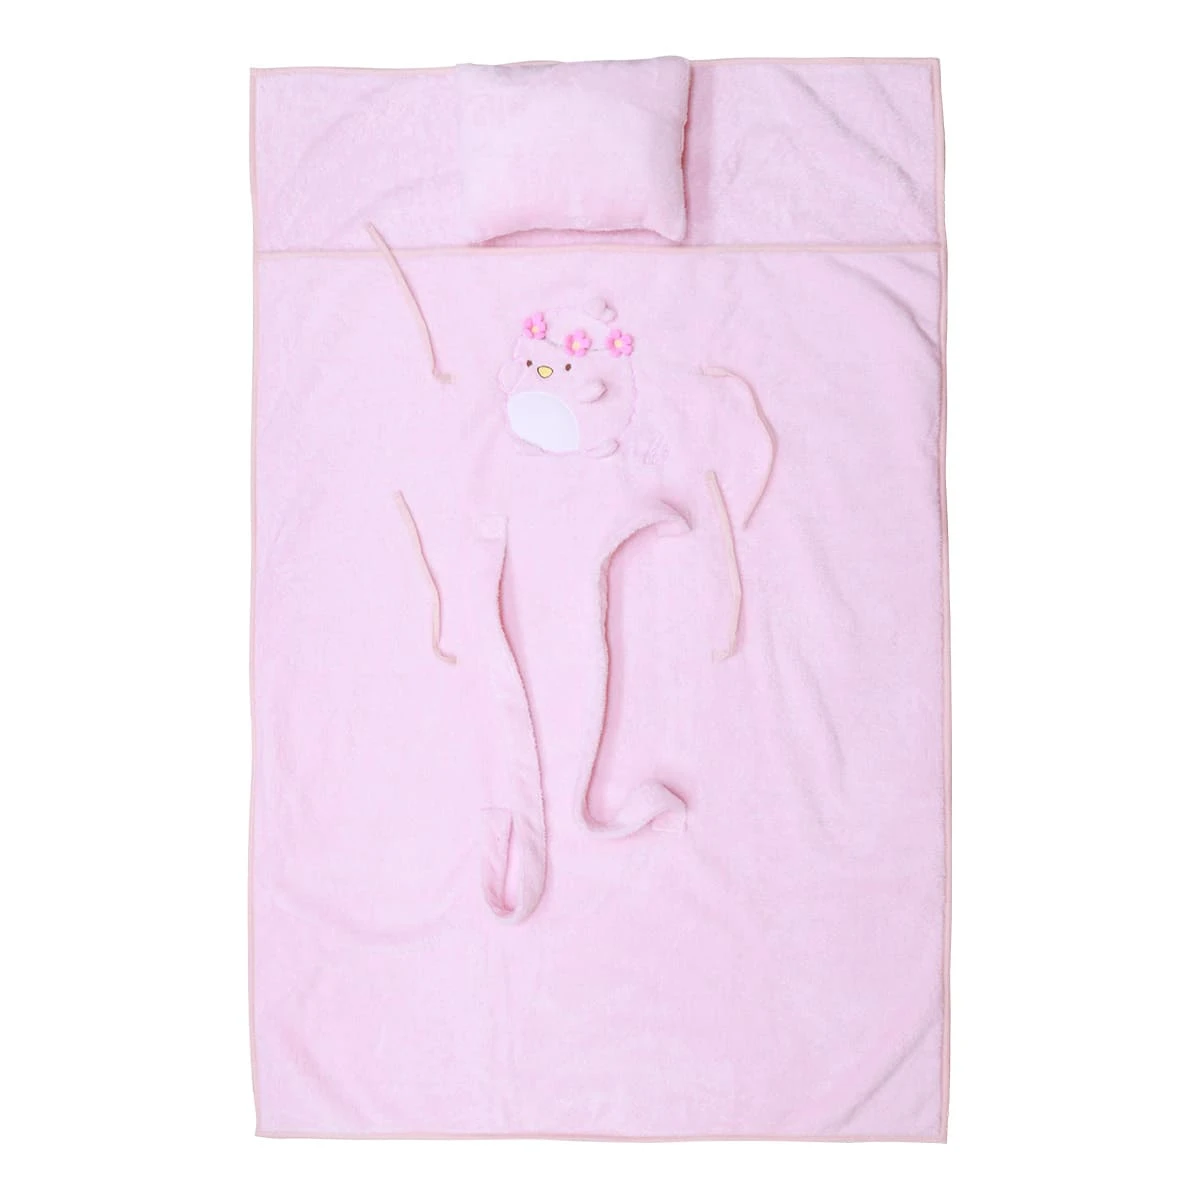 Puffy 3D Embroidery Recycled Plush Outdoor Blanket with Pillow (Pink)